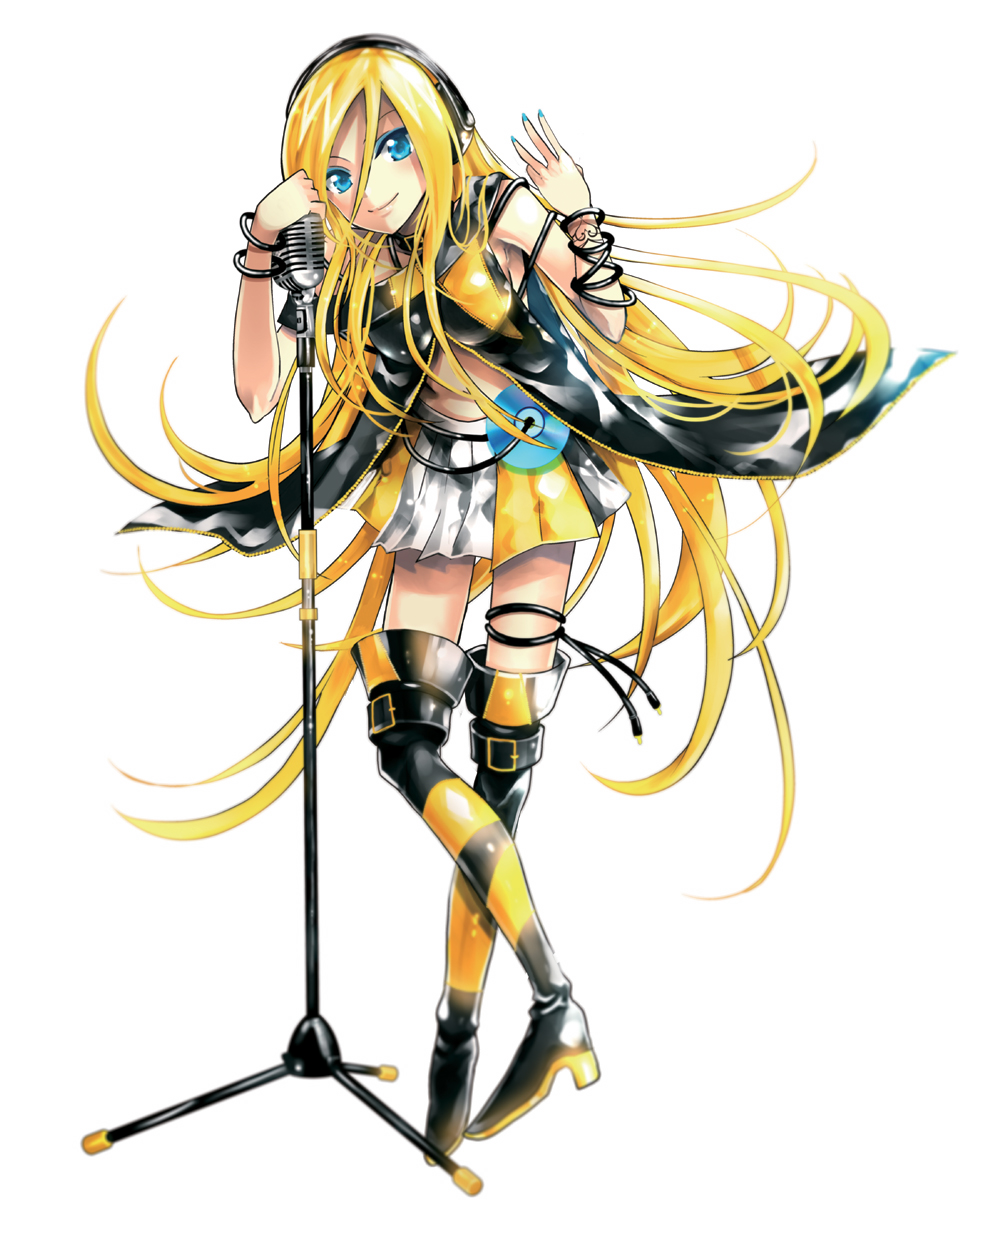 Pinterest | Vocaloid, Anime images, Lily